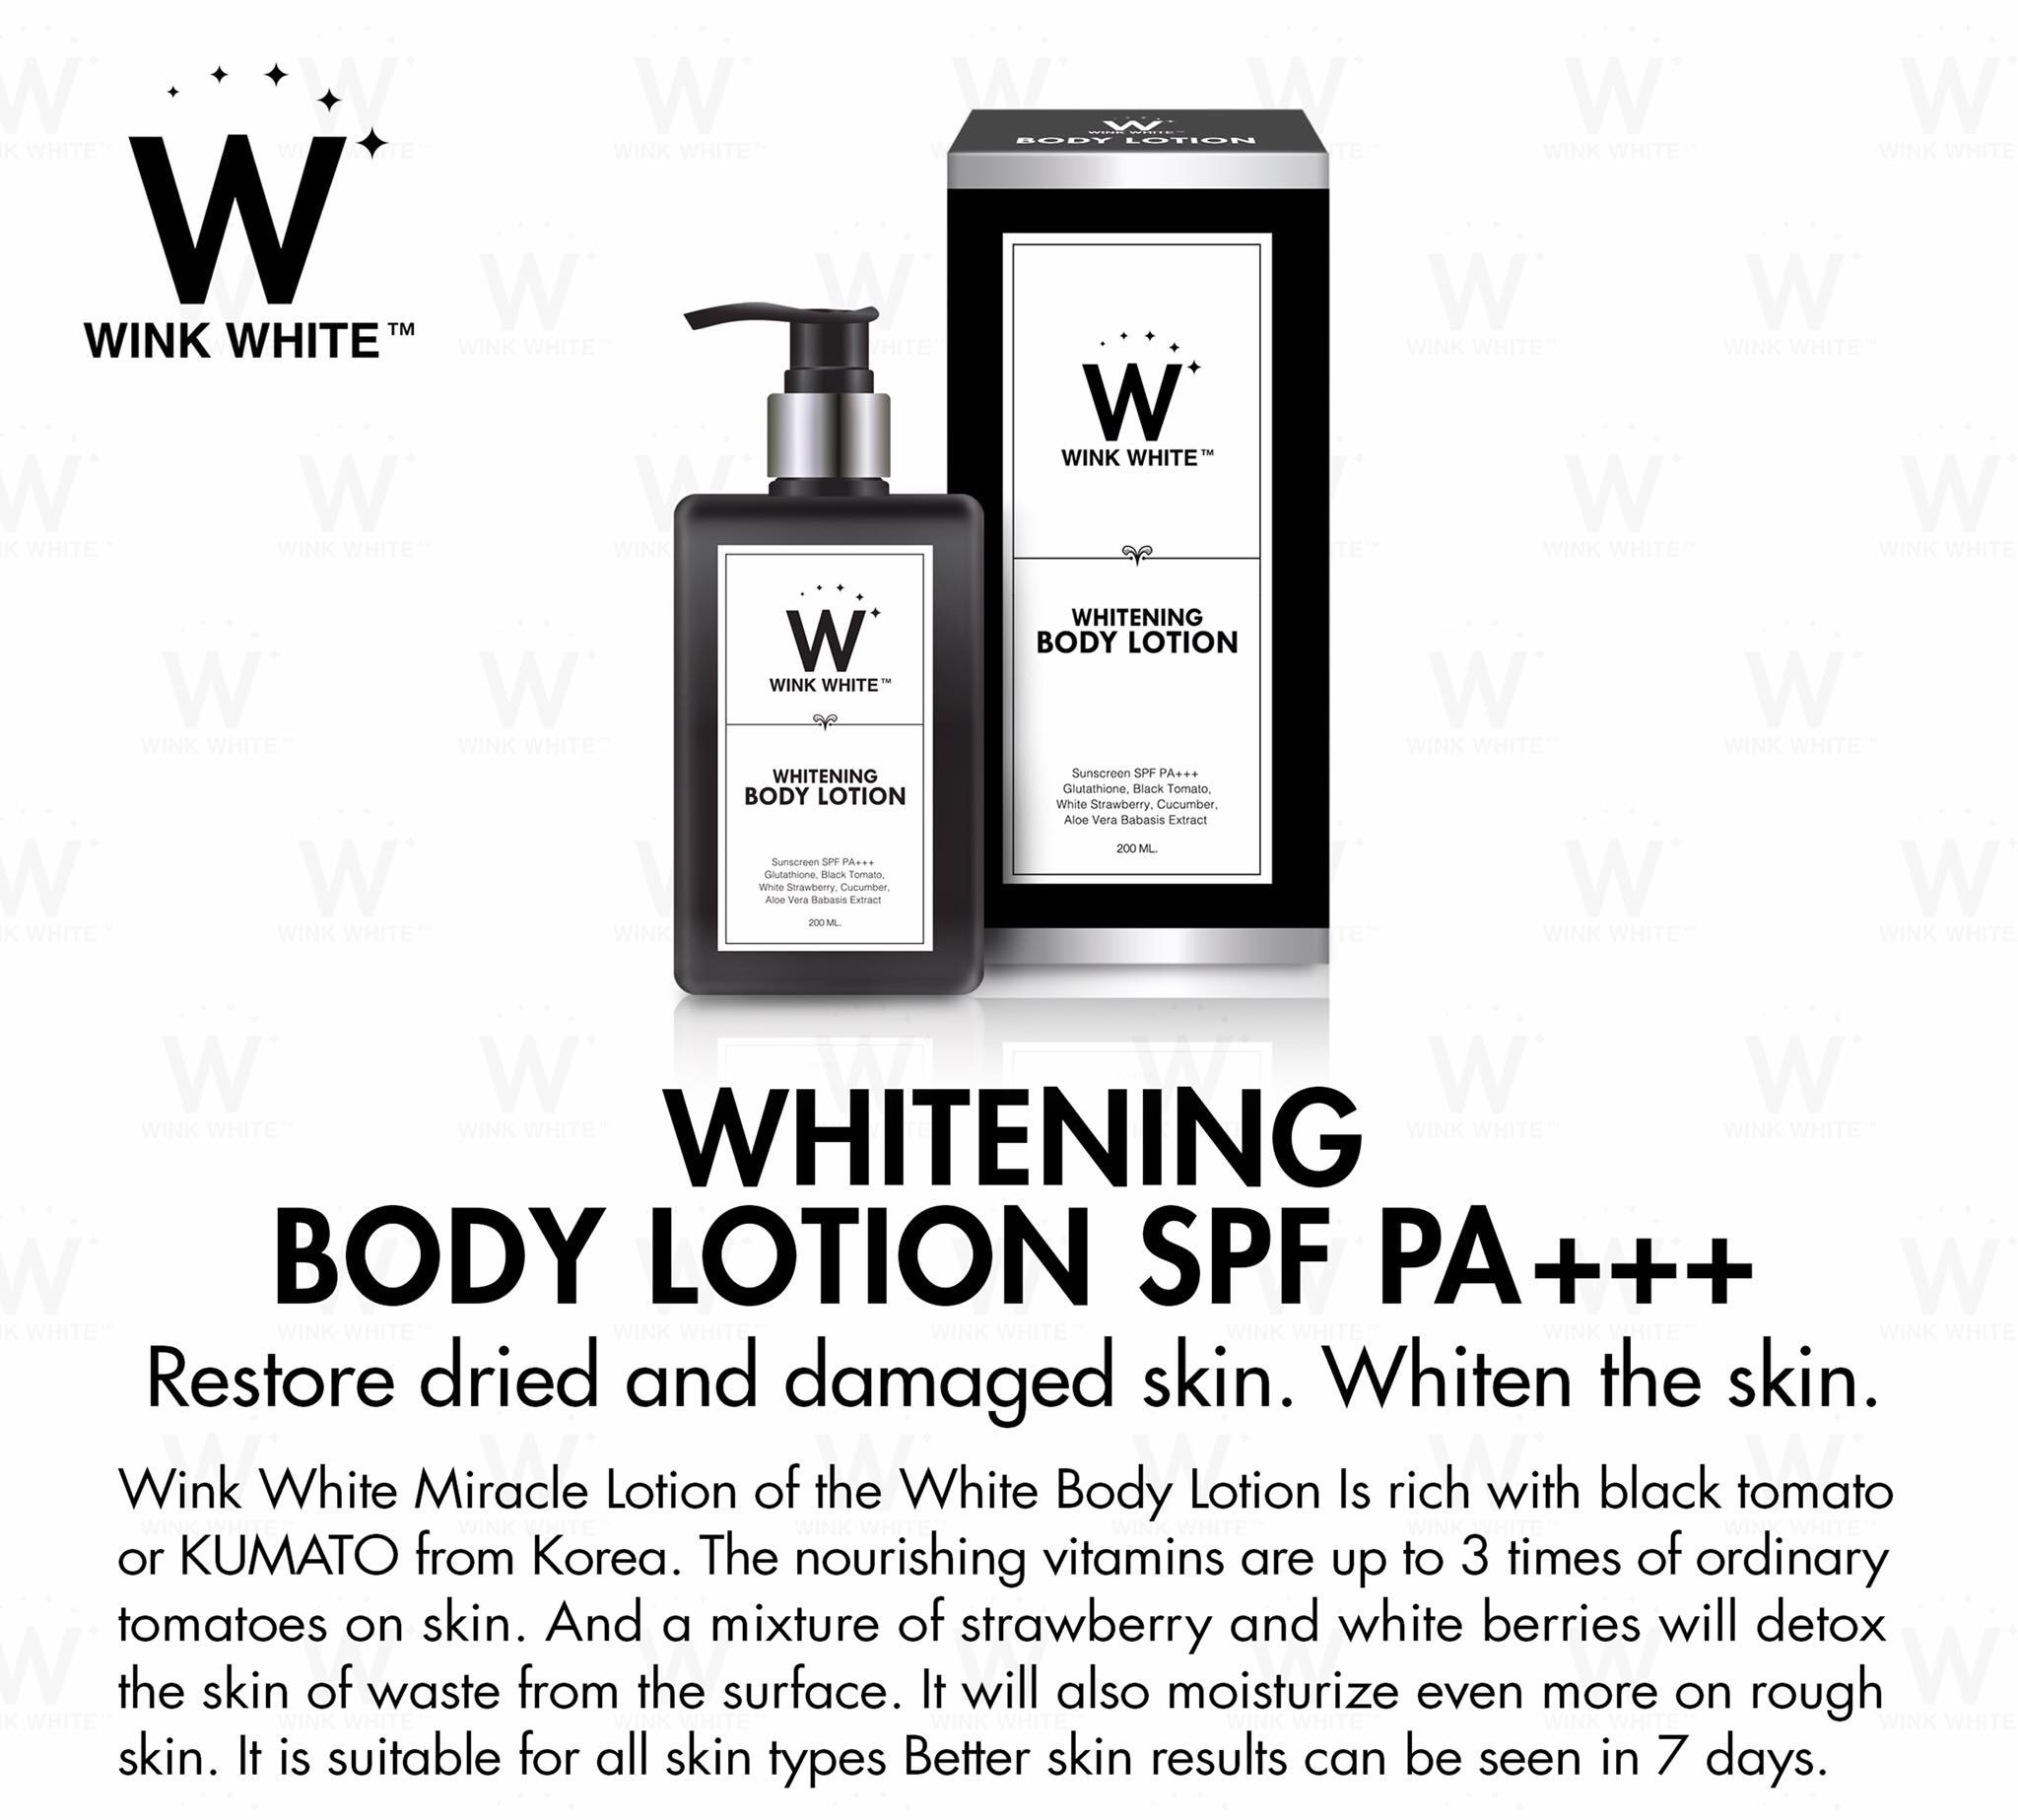 200 ml WINK WHITE BODY WHITE LOTION GLUTA LOTION WHITENING LOTION SKIN by "www.ccthaitown.com"